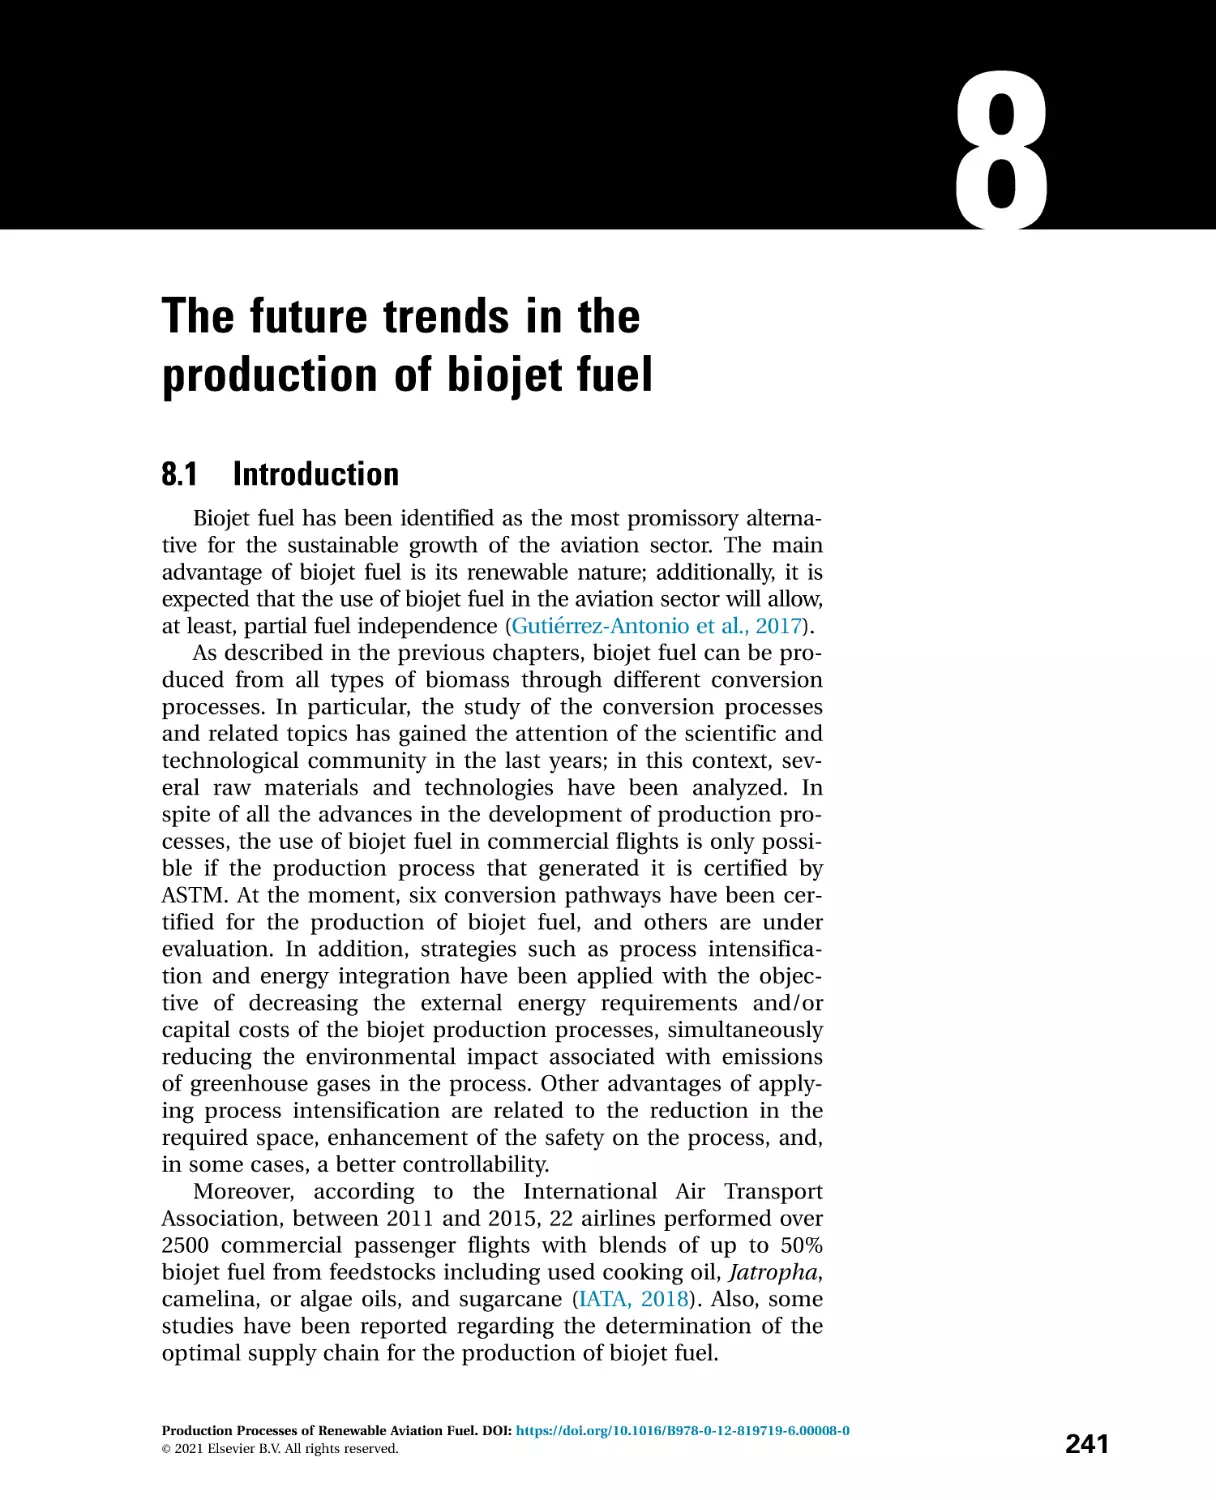 8---The-future-trends-in-the-productio_2021_Production-Processes-of-Renewabl
8 The future trends in the production of biojet fuel
8.1 Introduction